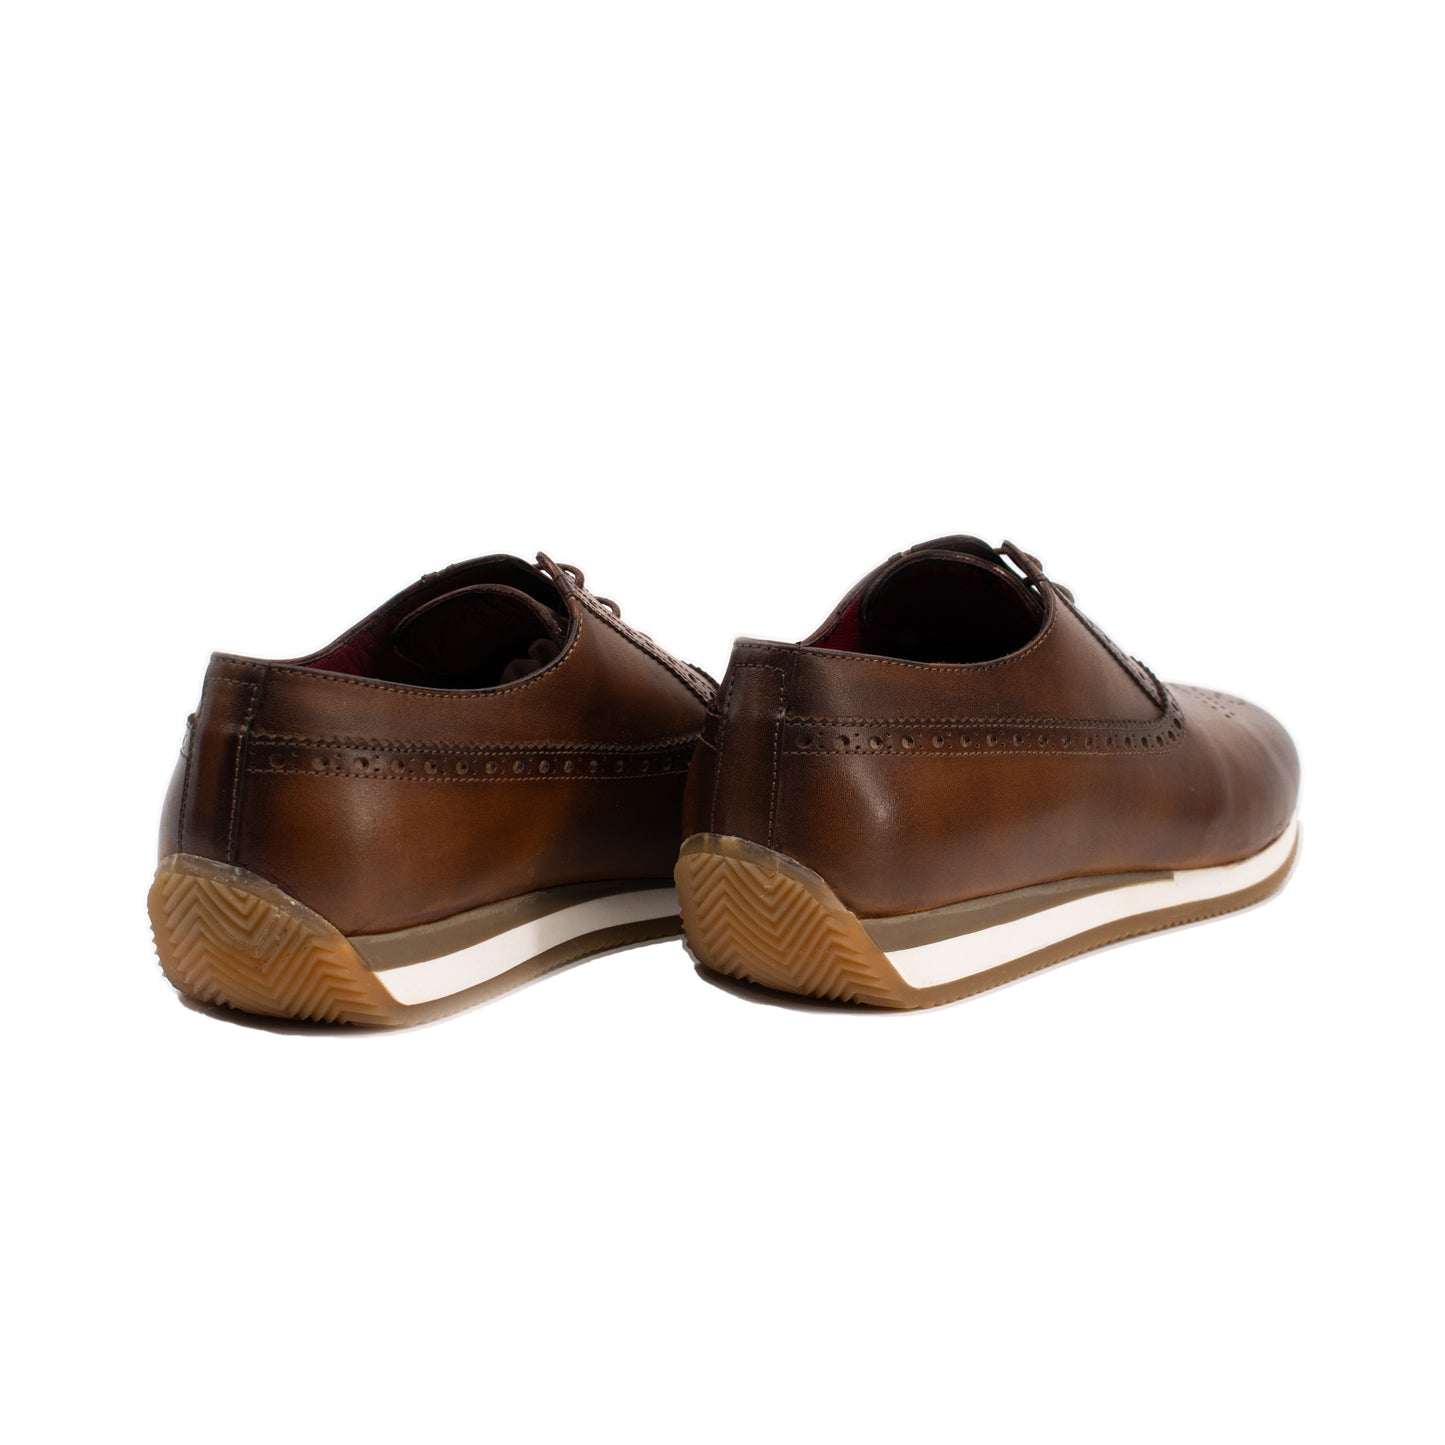 HCANSS BROWN ATHLETIC LEATHER SNEAKER